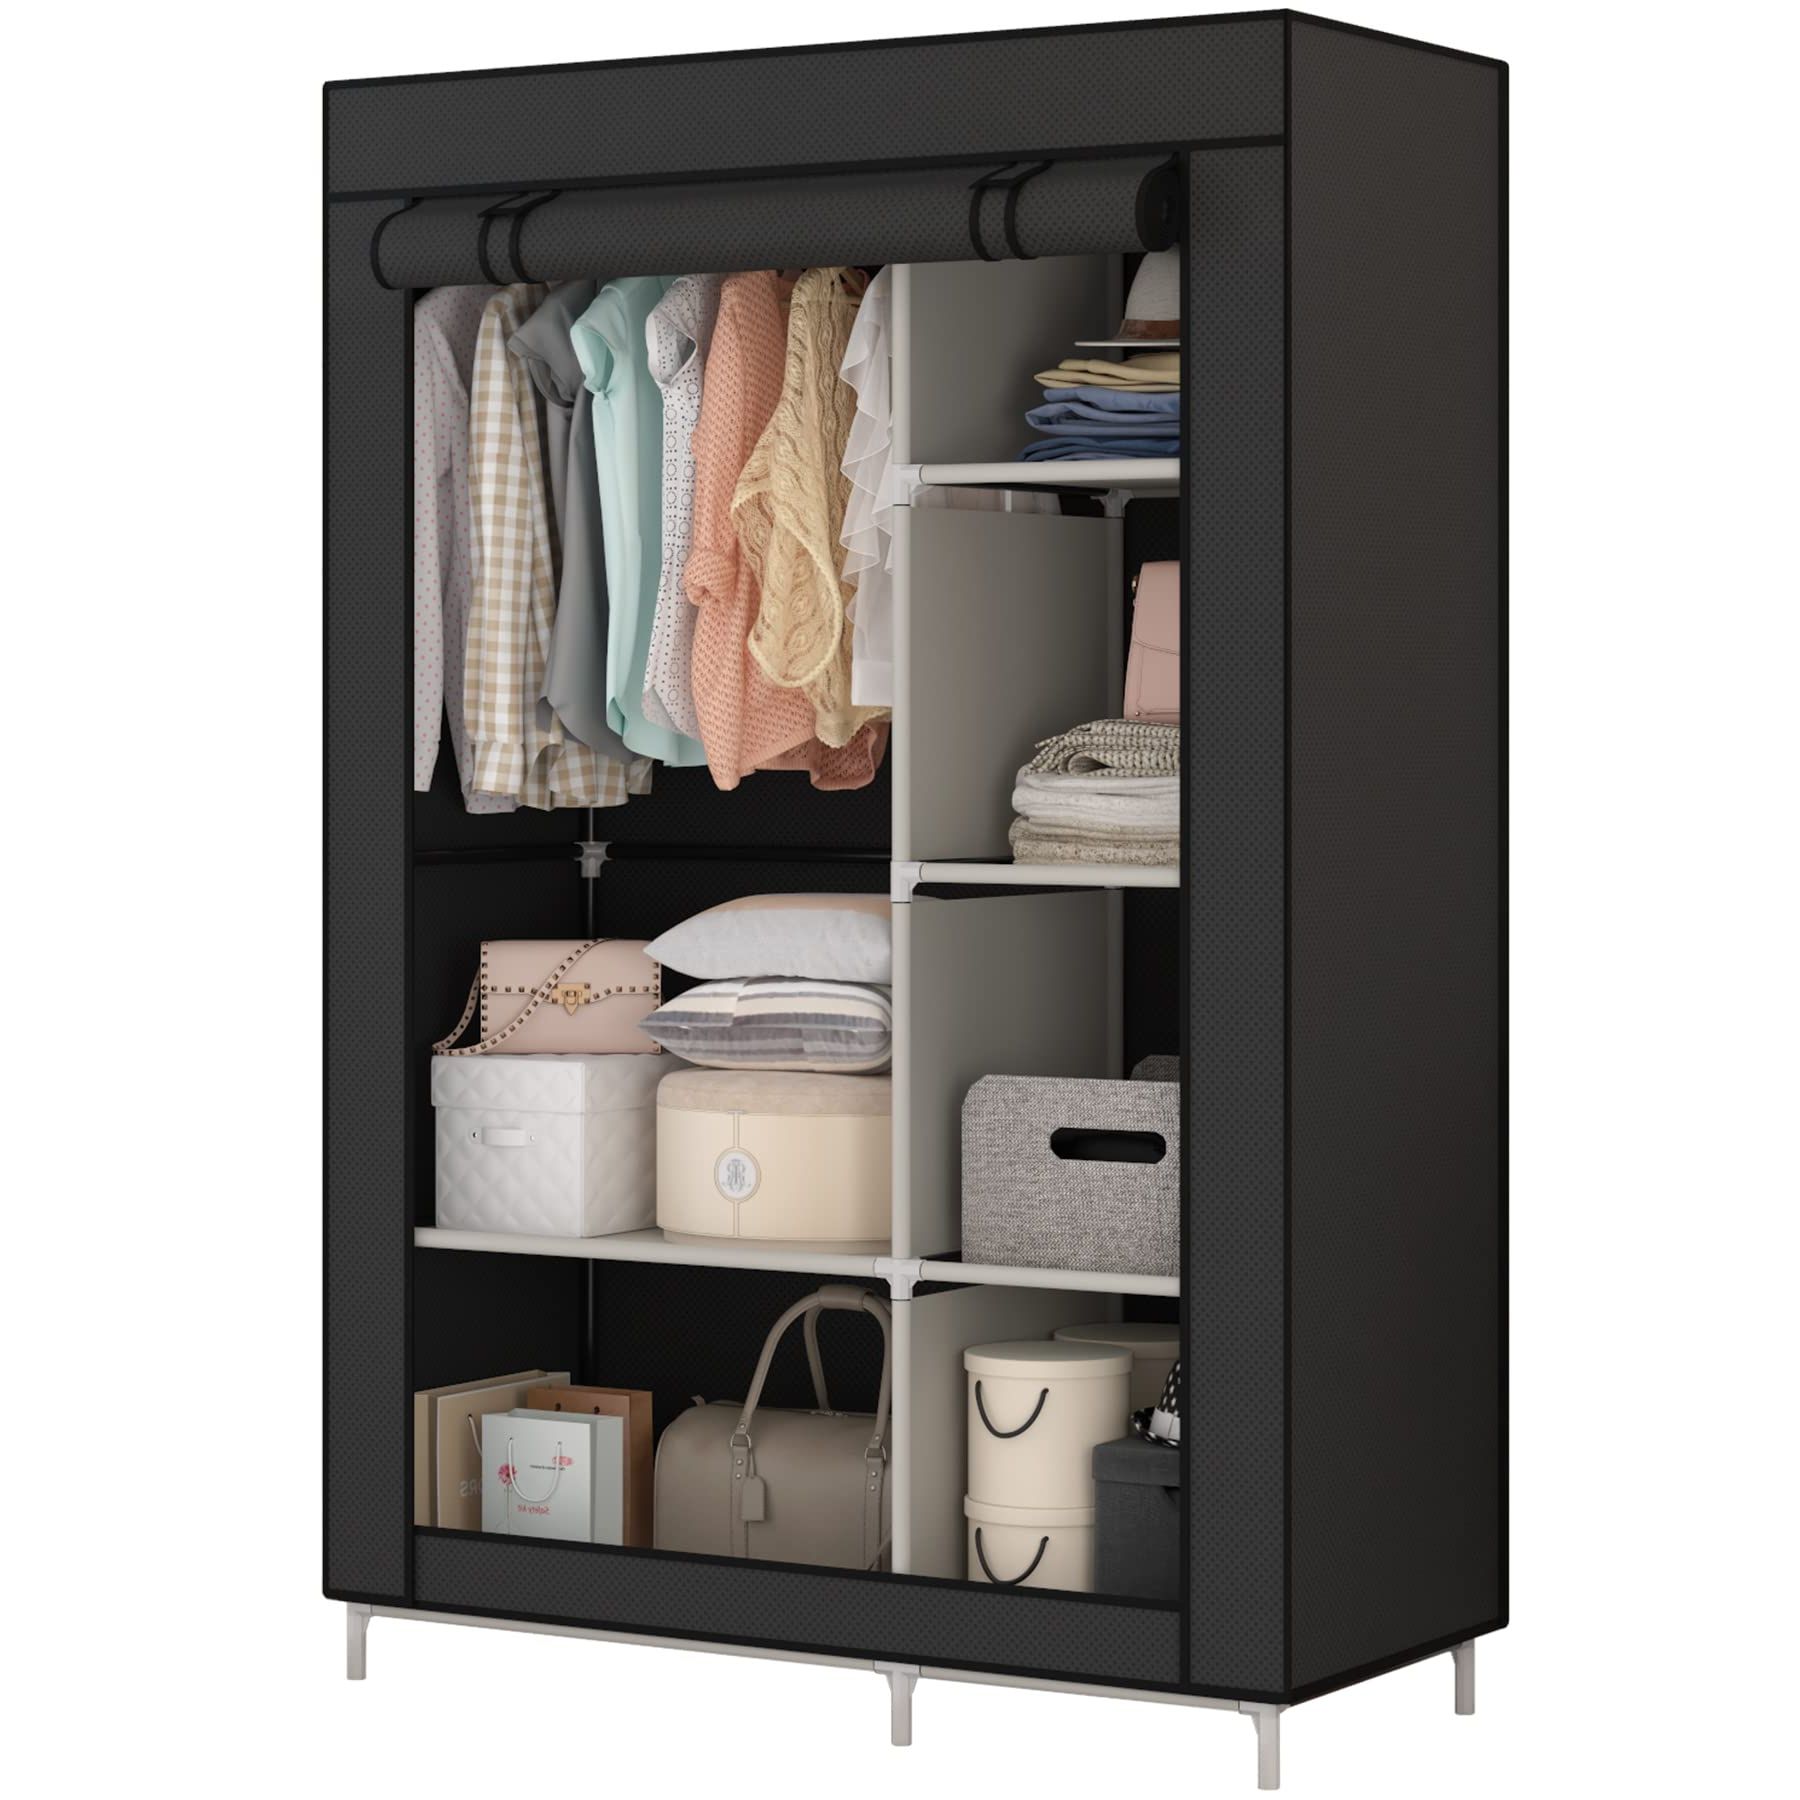 2018 Amazon: Calmootey Closet Storage Organizer,portable Wardrobe With 6  Shelves And Clothes Rod,non Woven Fabric Cover With 4 Side Pockets,black :  Home & Kitchen With Regard To 6 Shelf Wardrobes (Photo 3 of 10)